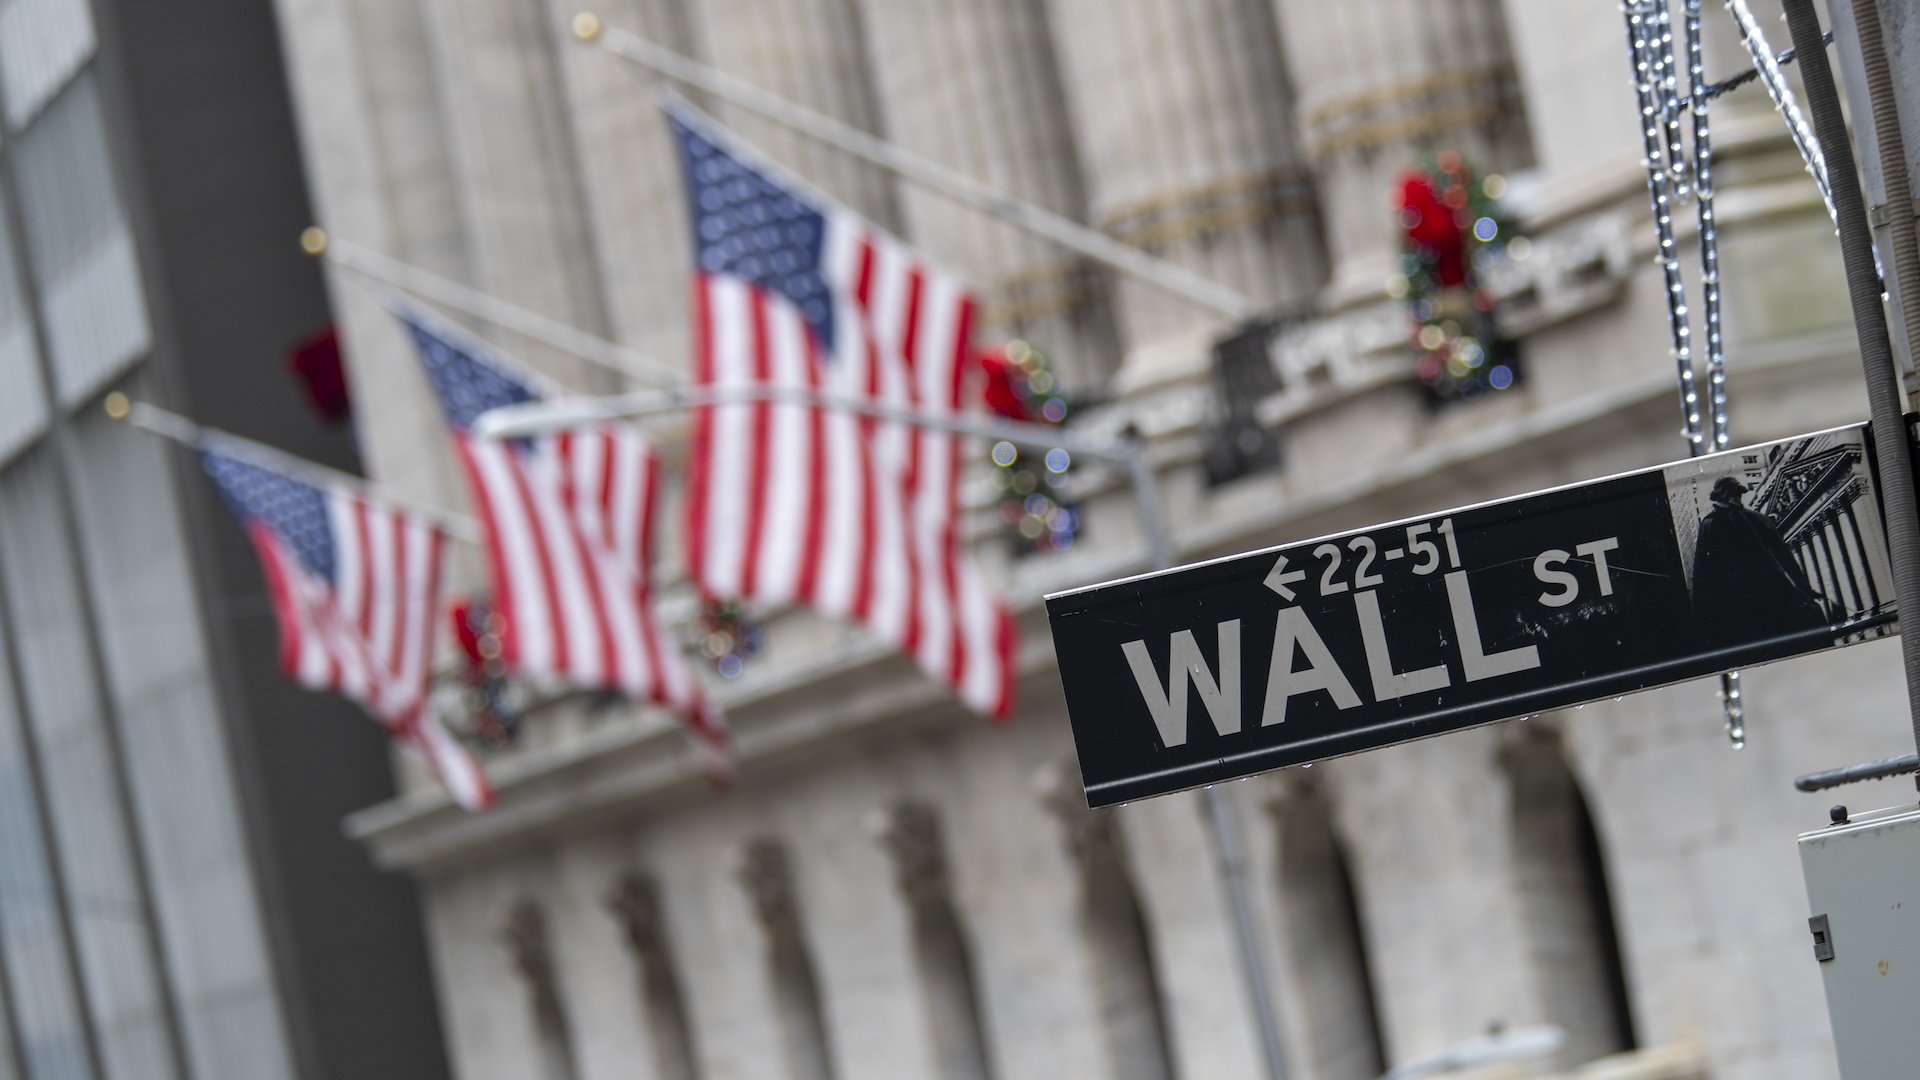 In this Jan. 3, 2020 file photo, the Wall St. street sign is framed by American flags flying outside the New York Stock Exchange in New York. Stocks are falling early on Wall Street Thursday, Sept. 17, as the late selling from the previous day carries over. (AP Photo/Mary Altaffer, File)